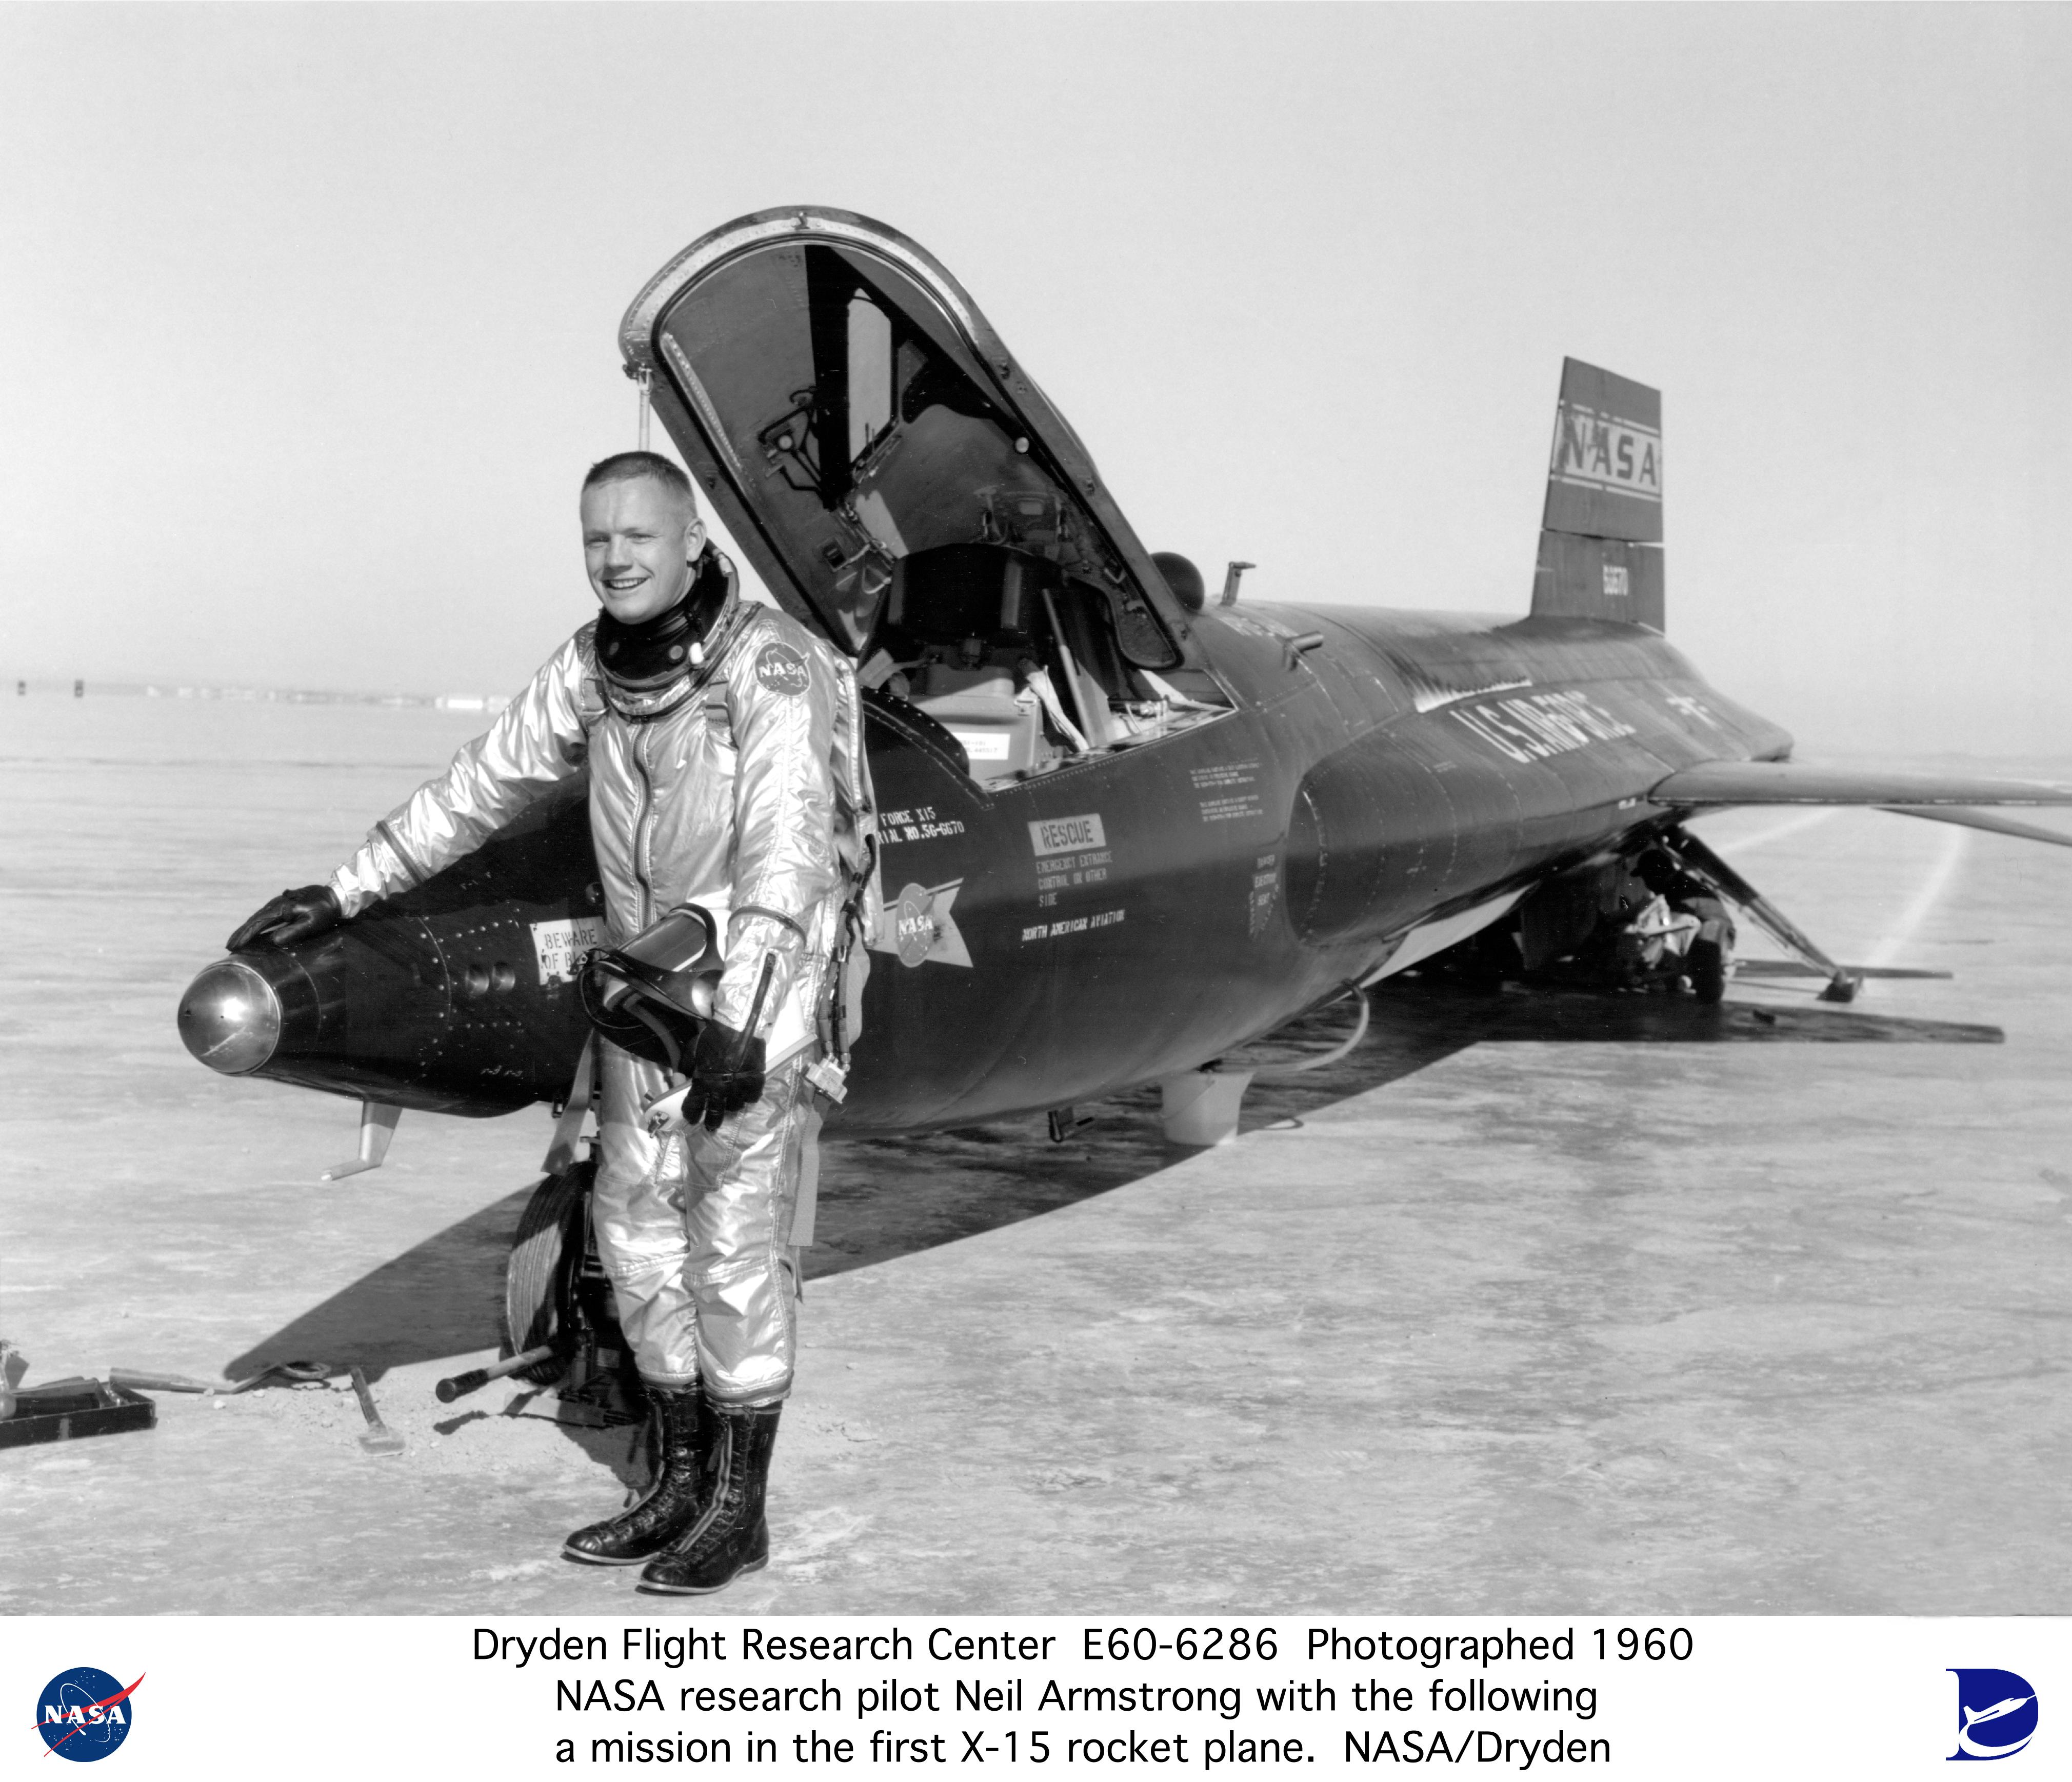 North American Aviation X-15 56-6670 with Neil A. Armstrong, Jr., NASA Research Test Pilot, Edwards AFB, 1960